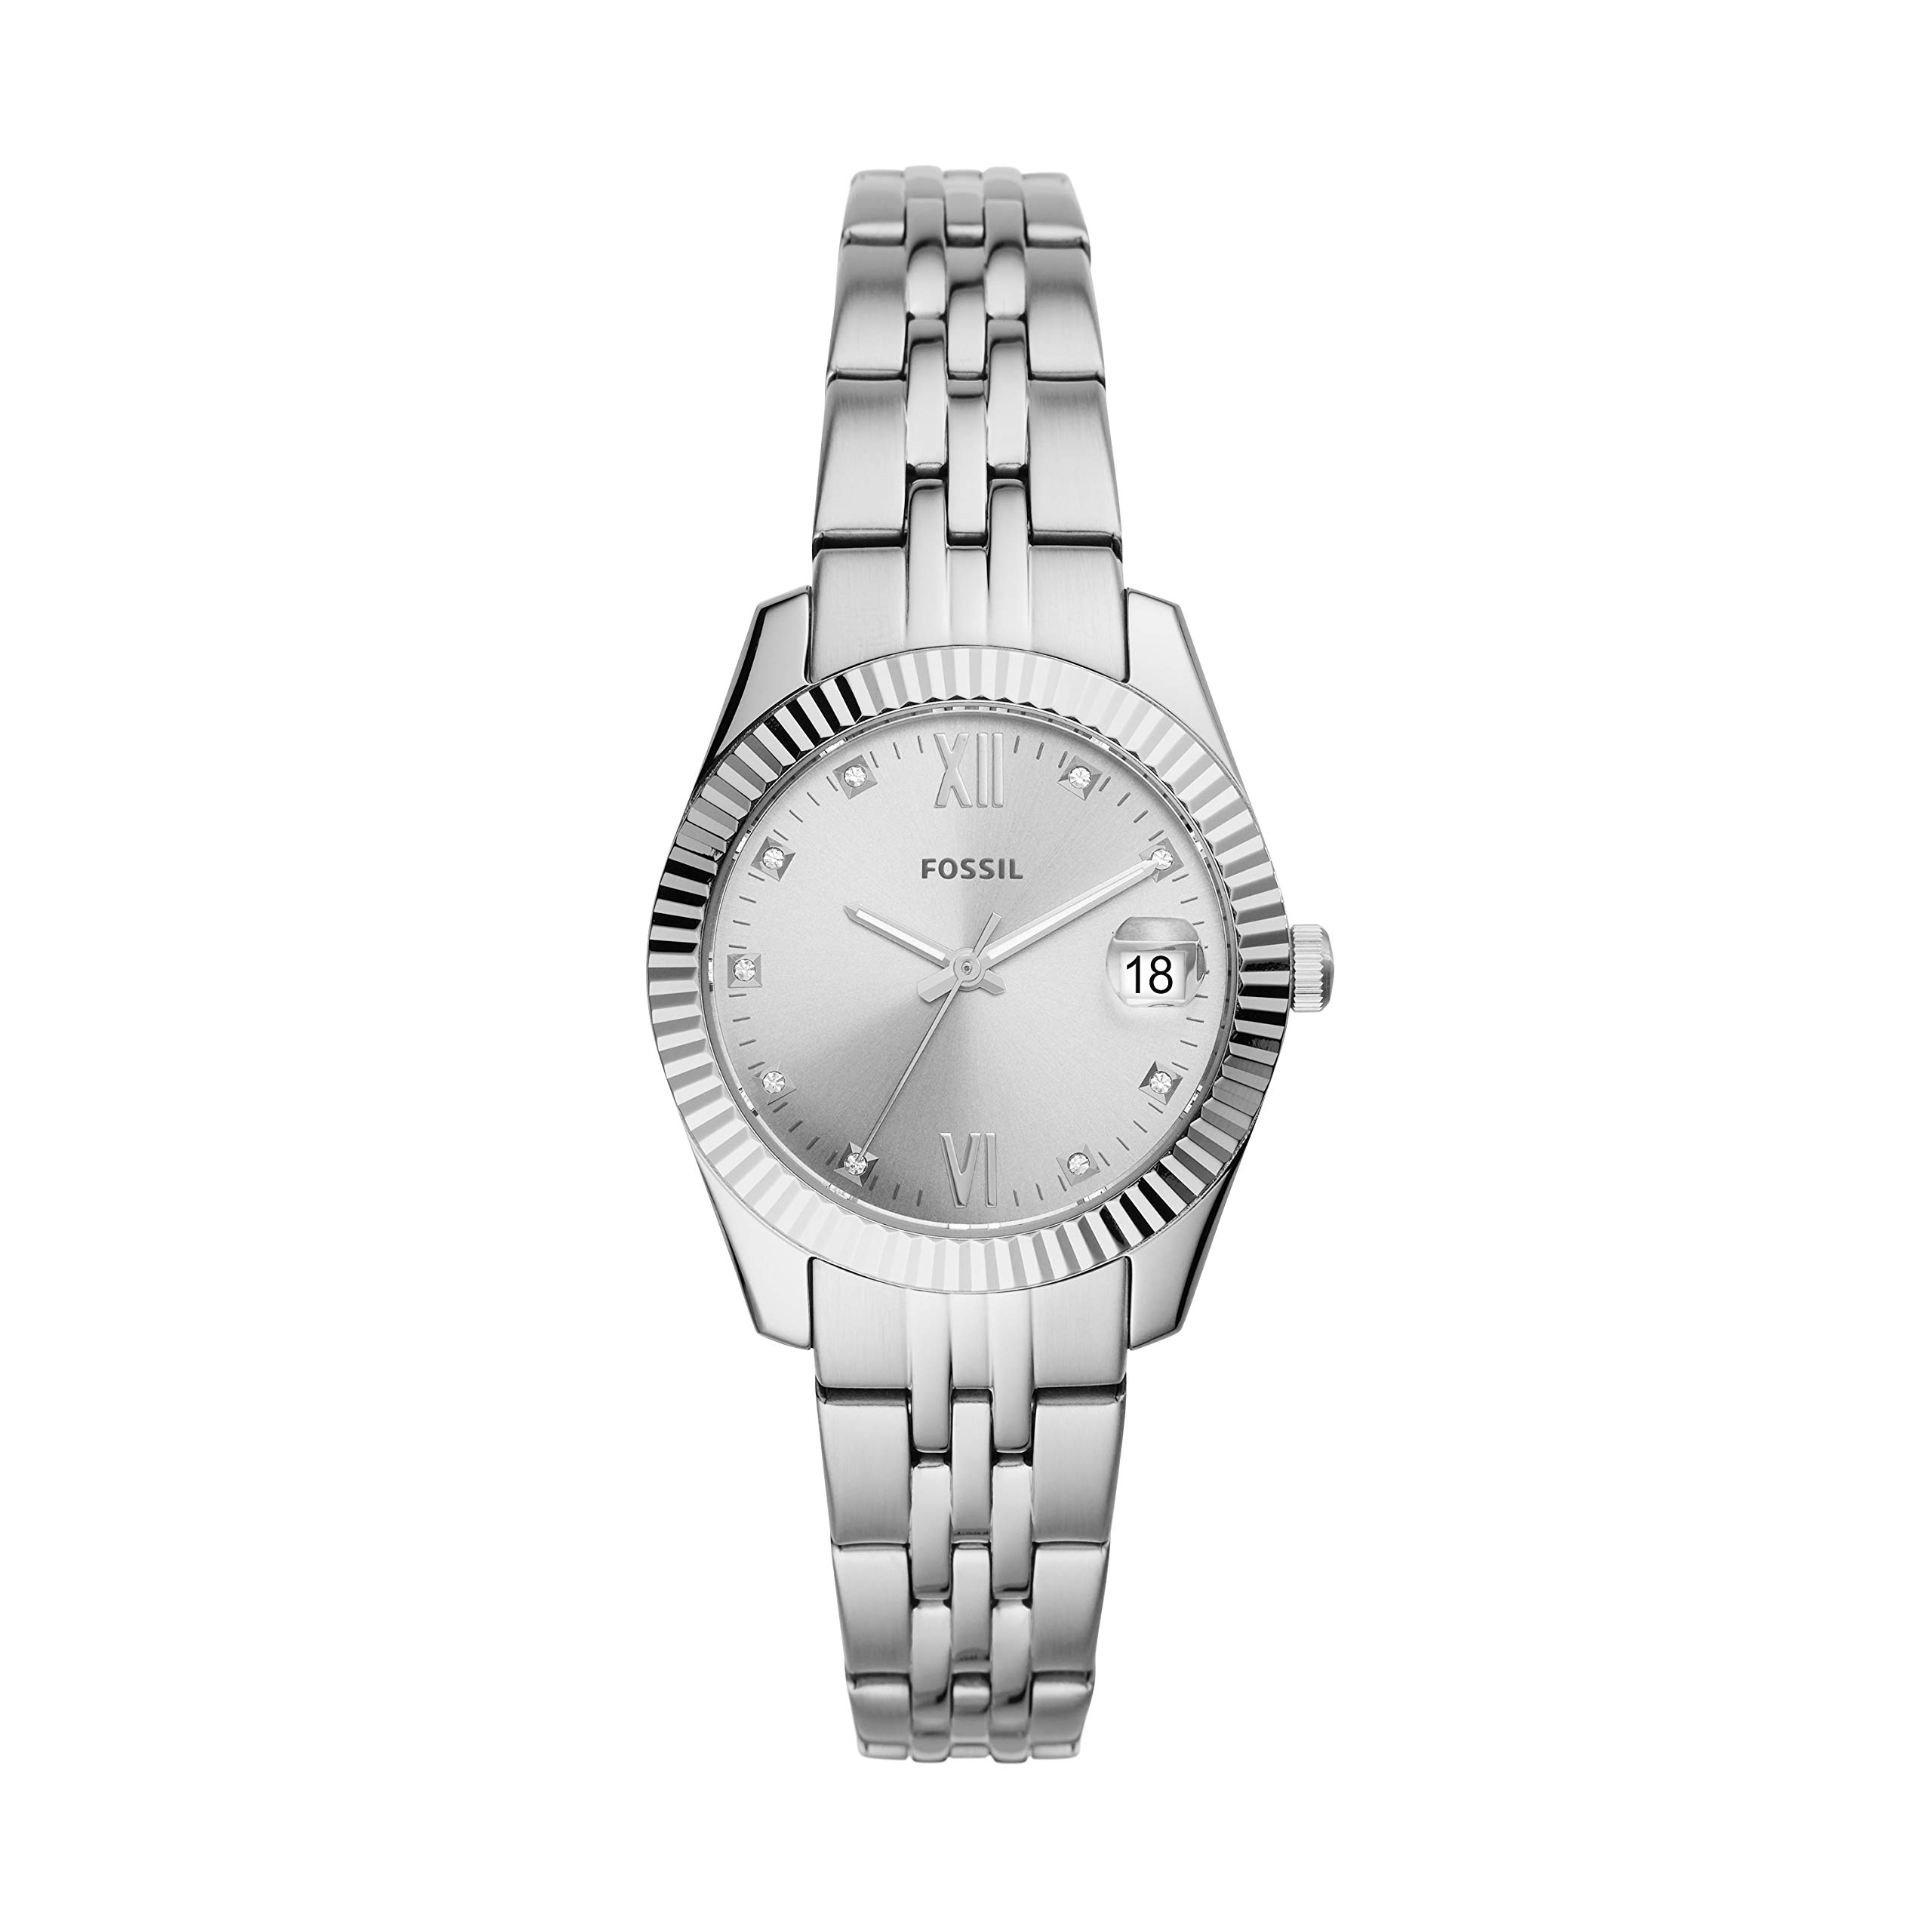 Fossil Scarlette Women's Sports Watch with Stainless Steel Bracelet or Genuine Leather Band